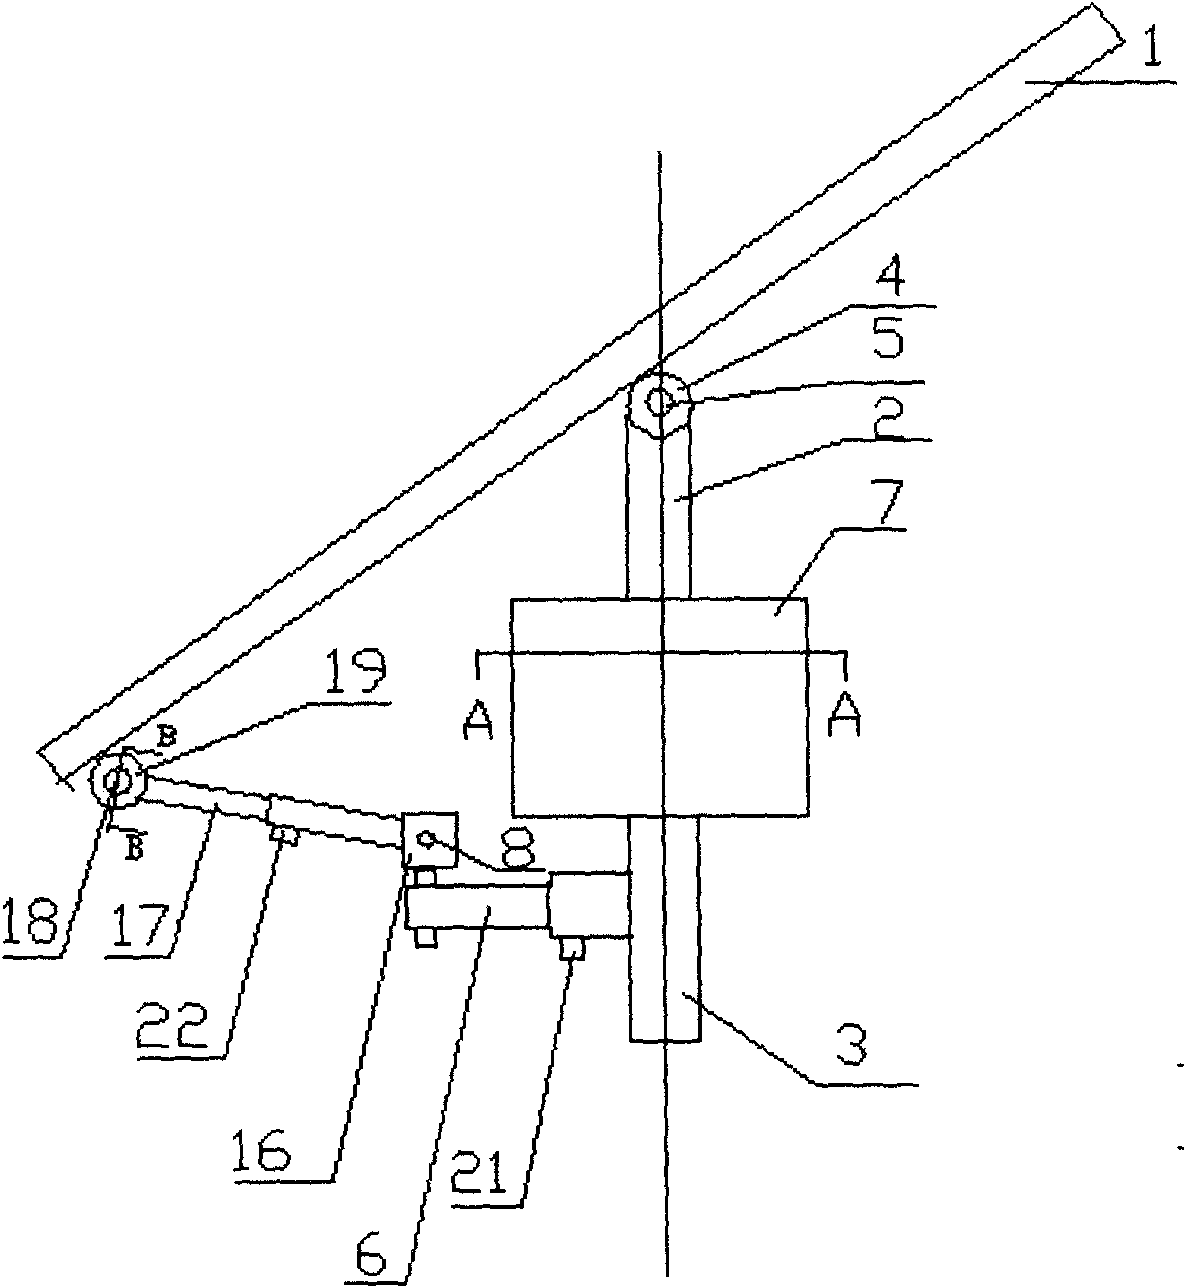 Quasi-two-dimensional sunlight tracking system with single connecting rod